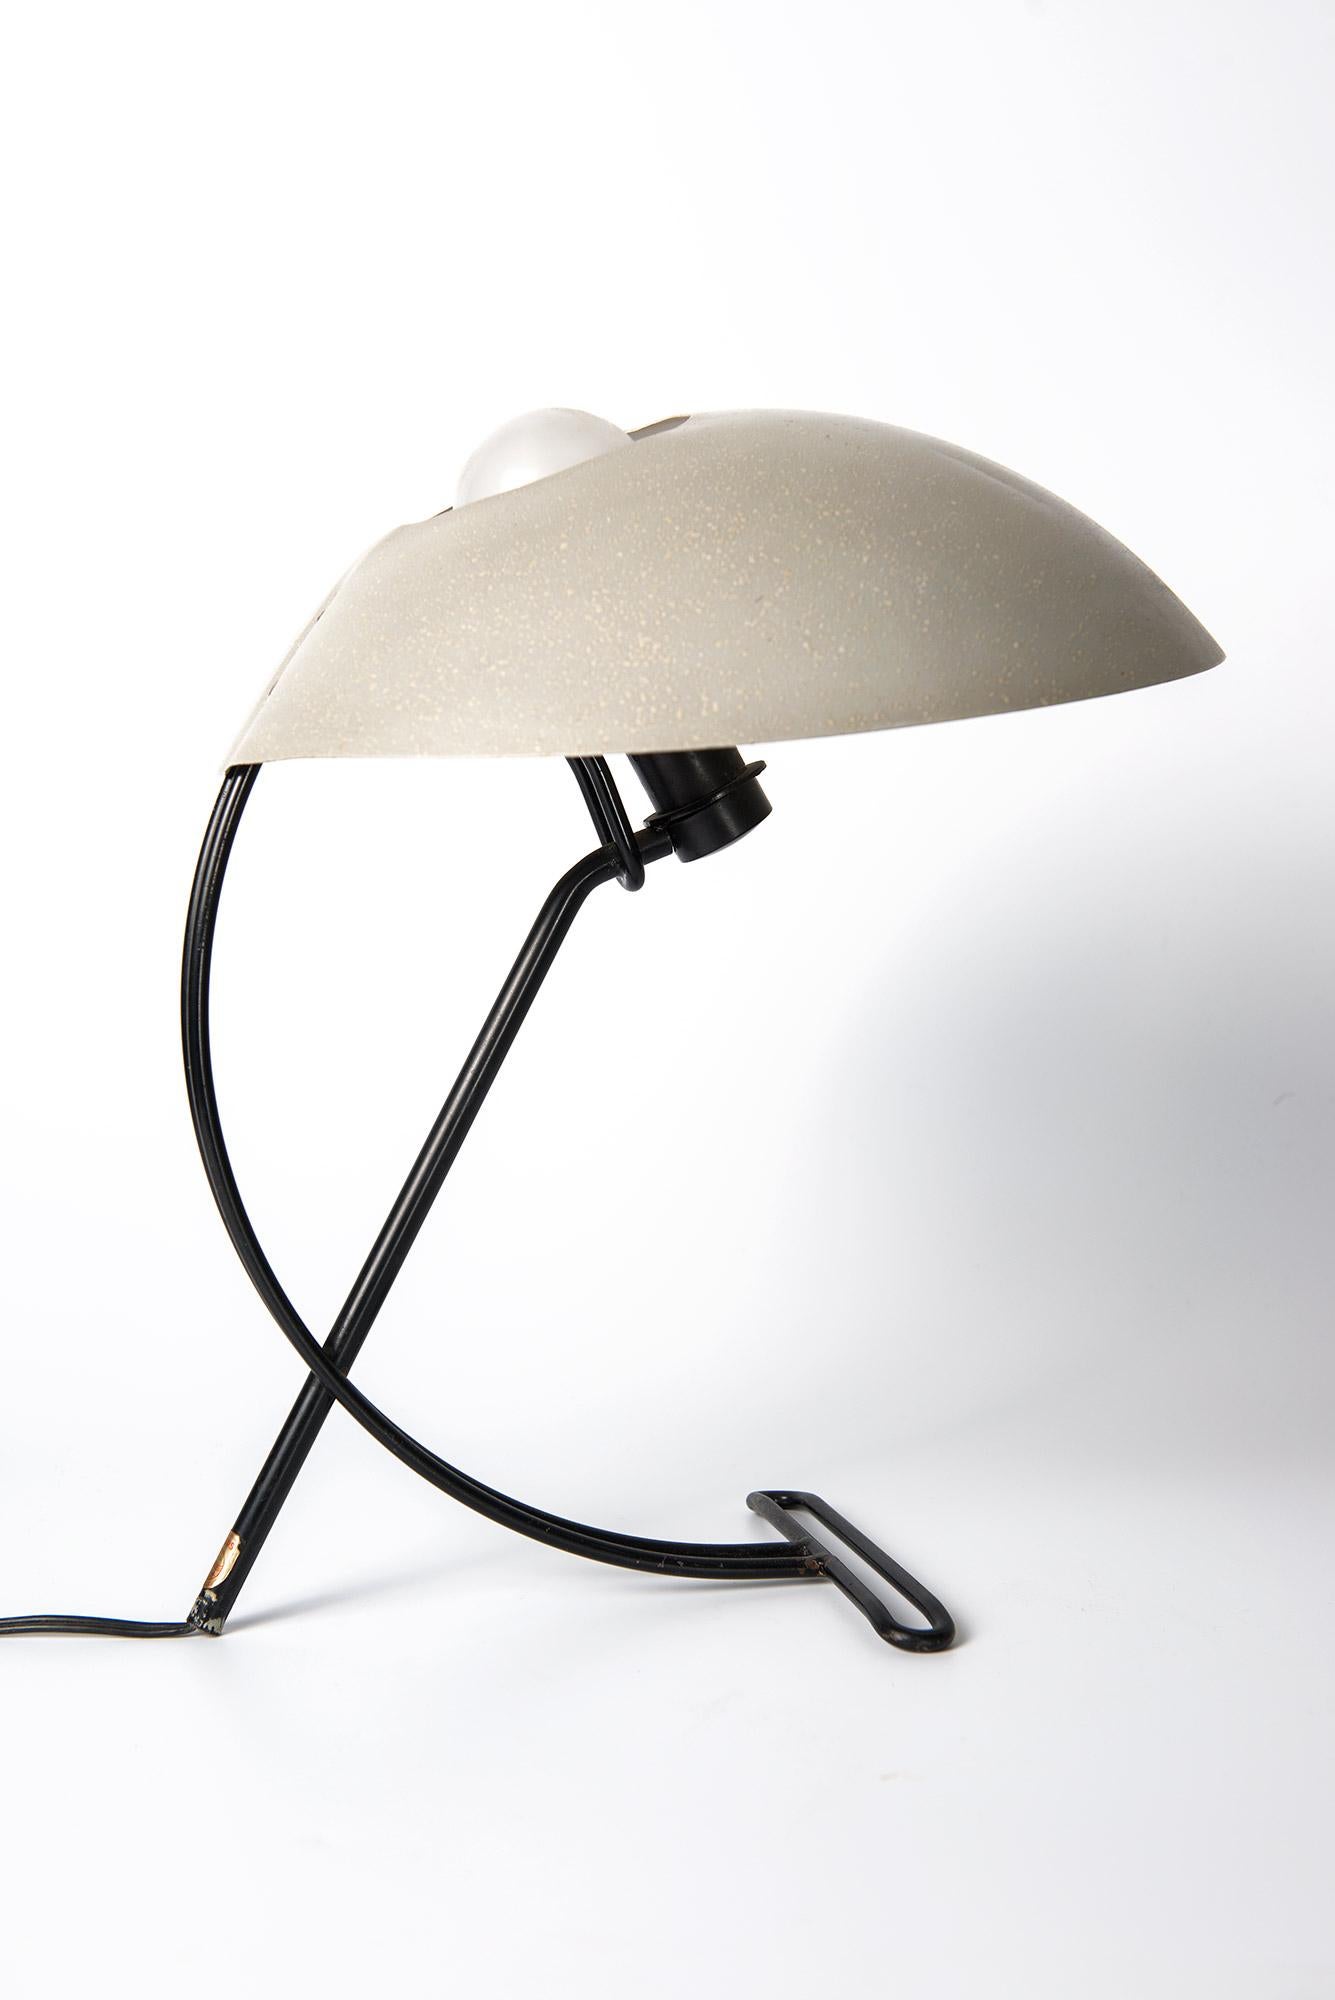 Iconic table or desk light Model NB100, designed by Louis Kalff for Philips from the 1950s.
Original label from Philips.